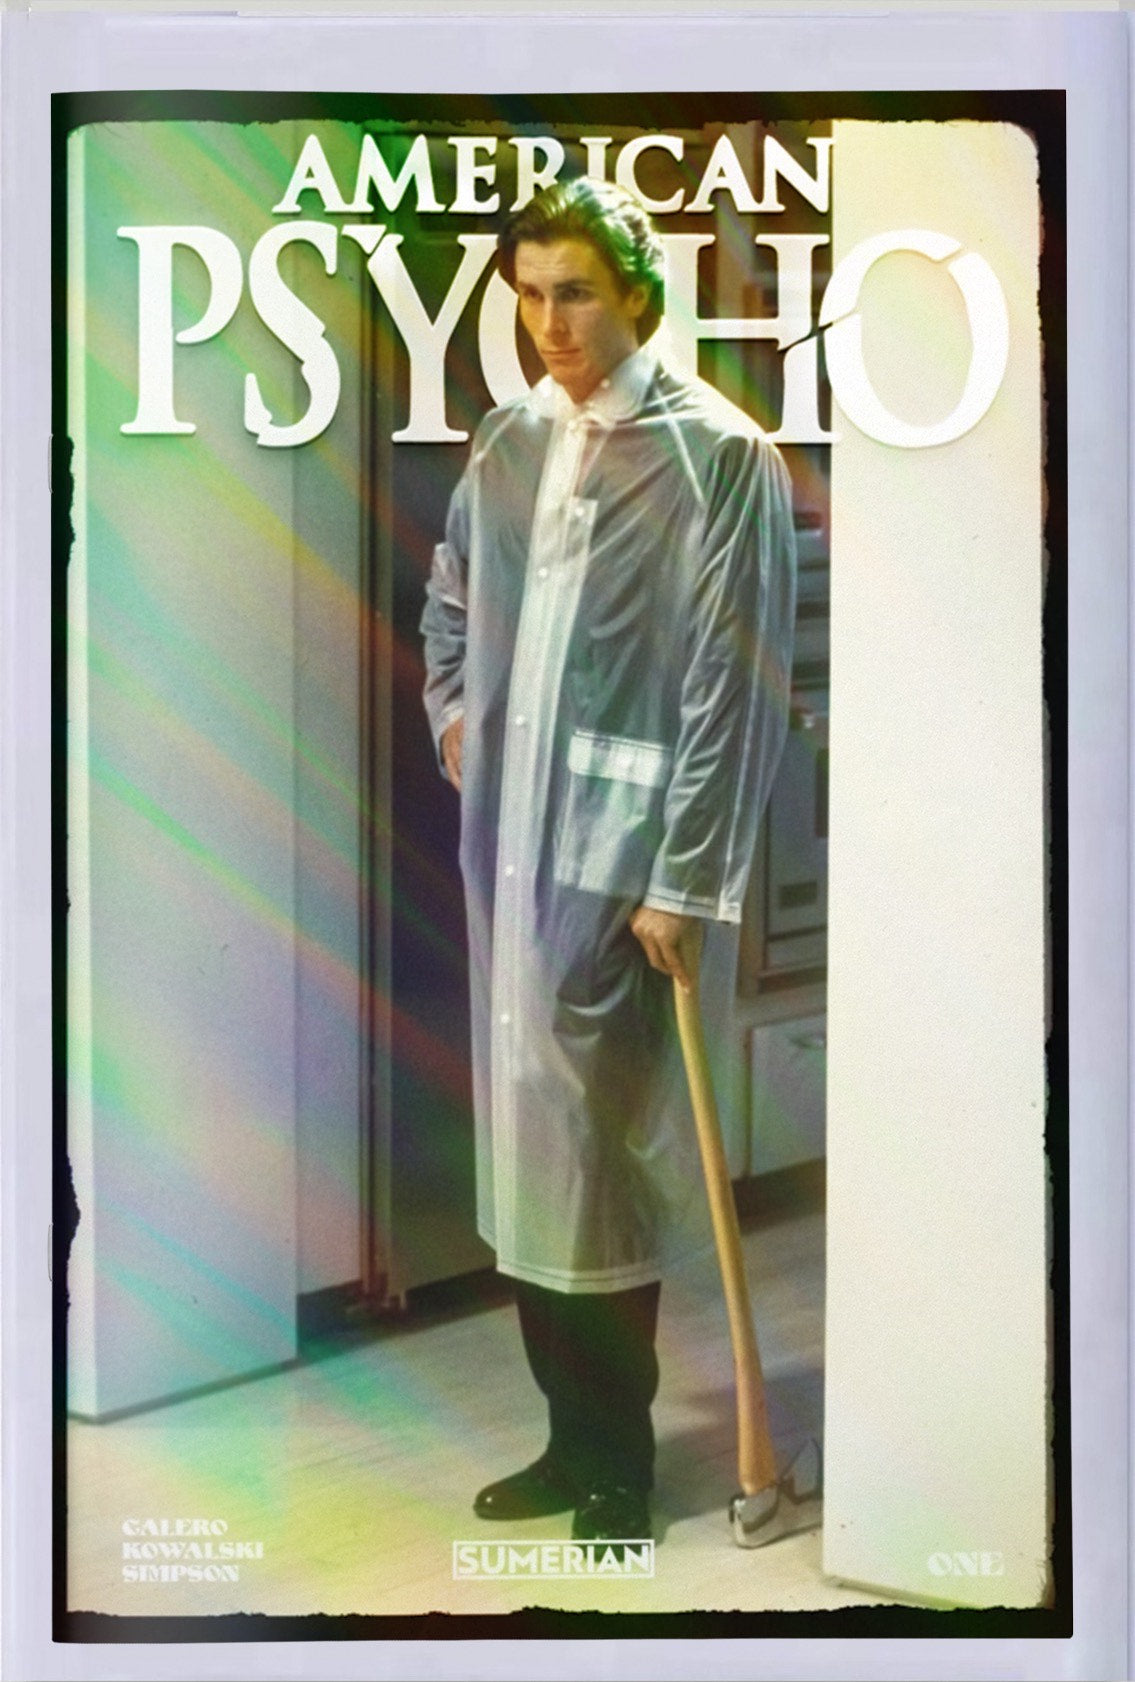 American Psycho #1 (Christian Bale Foil Photo Cover)